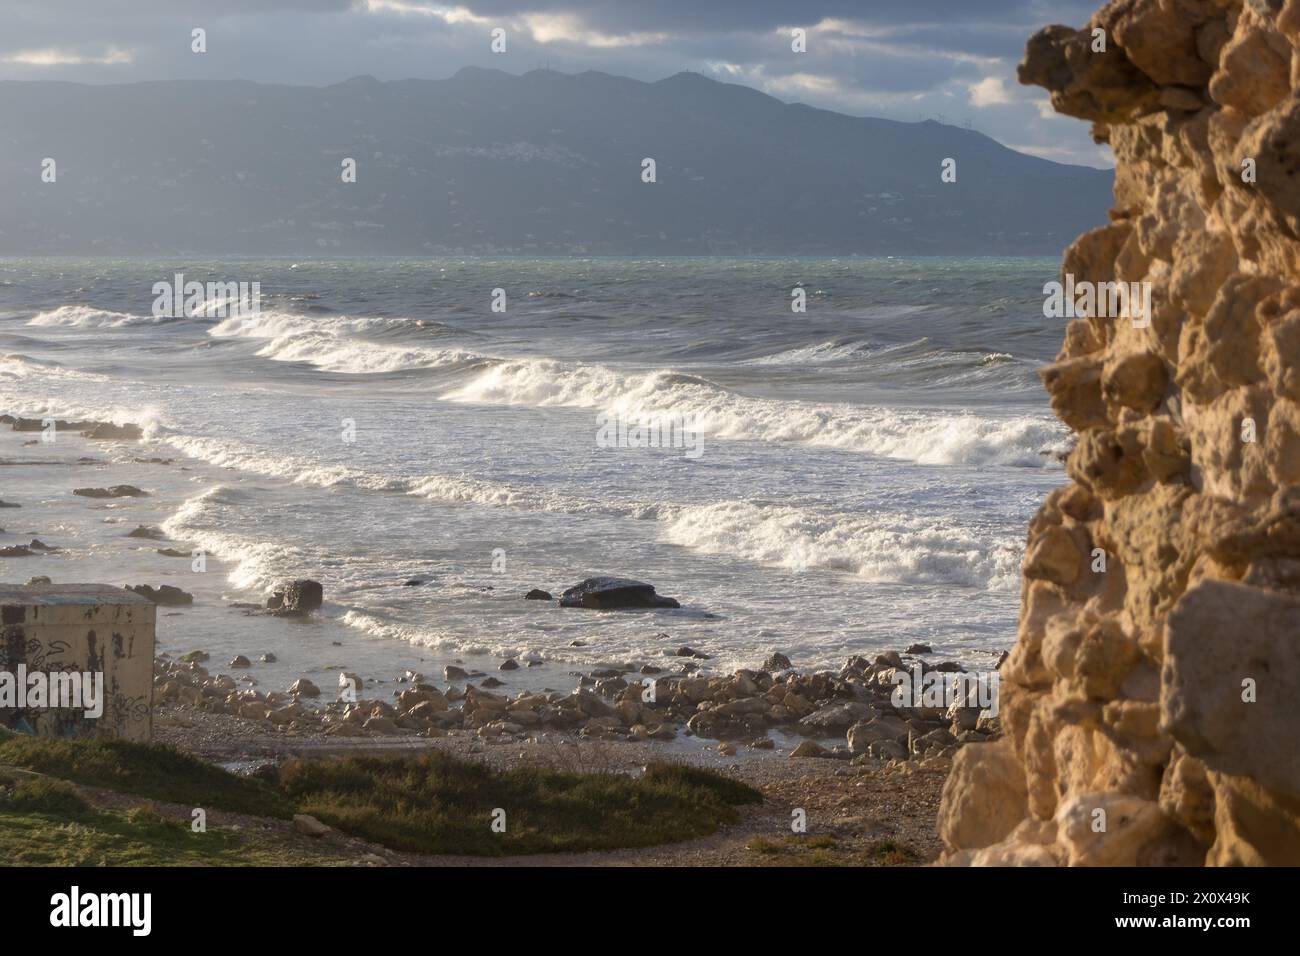 Windy day at the beach. Big waves. view from a rocky spot above tha beach. Mountains in the backround. Stock Photo